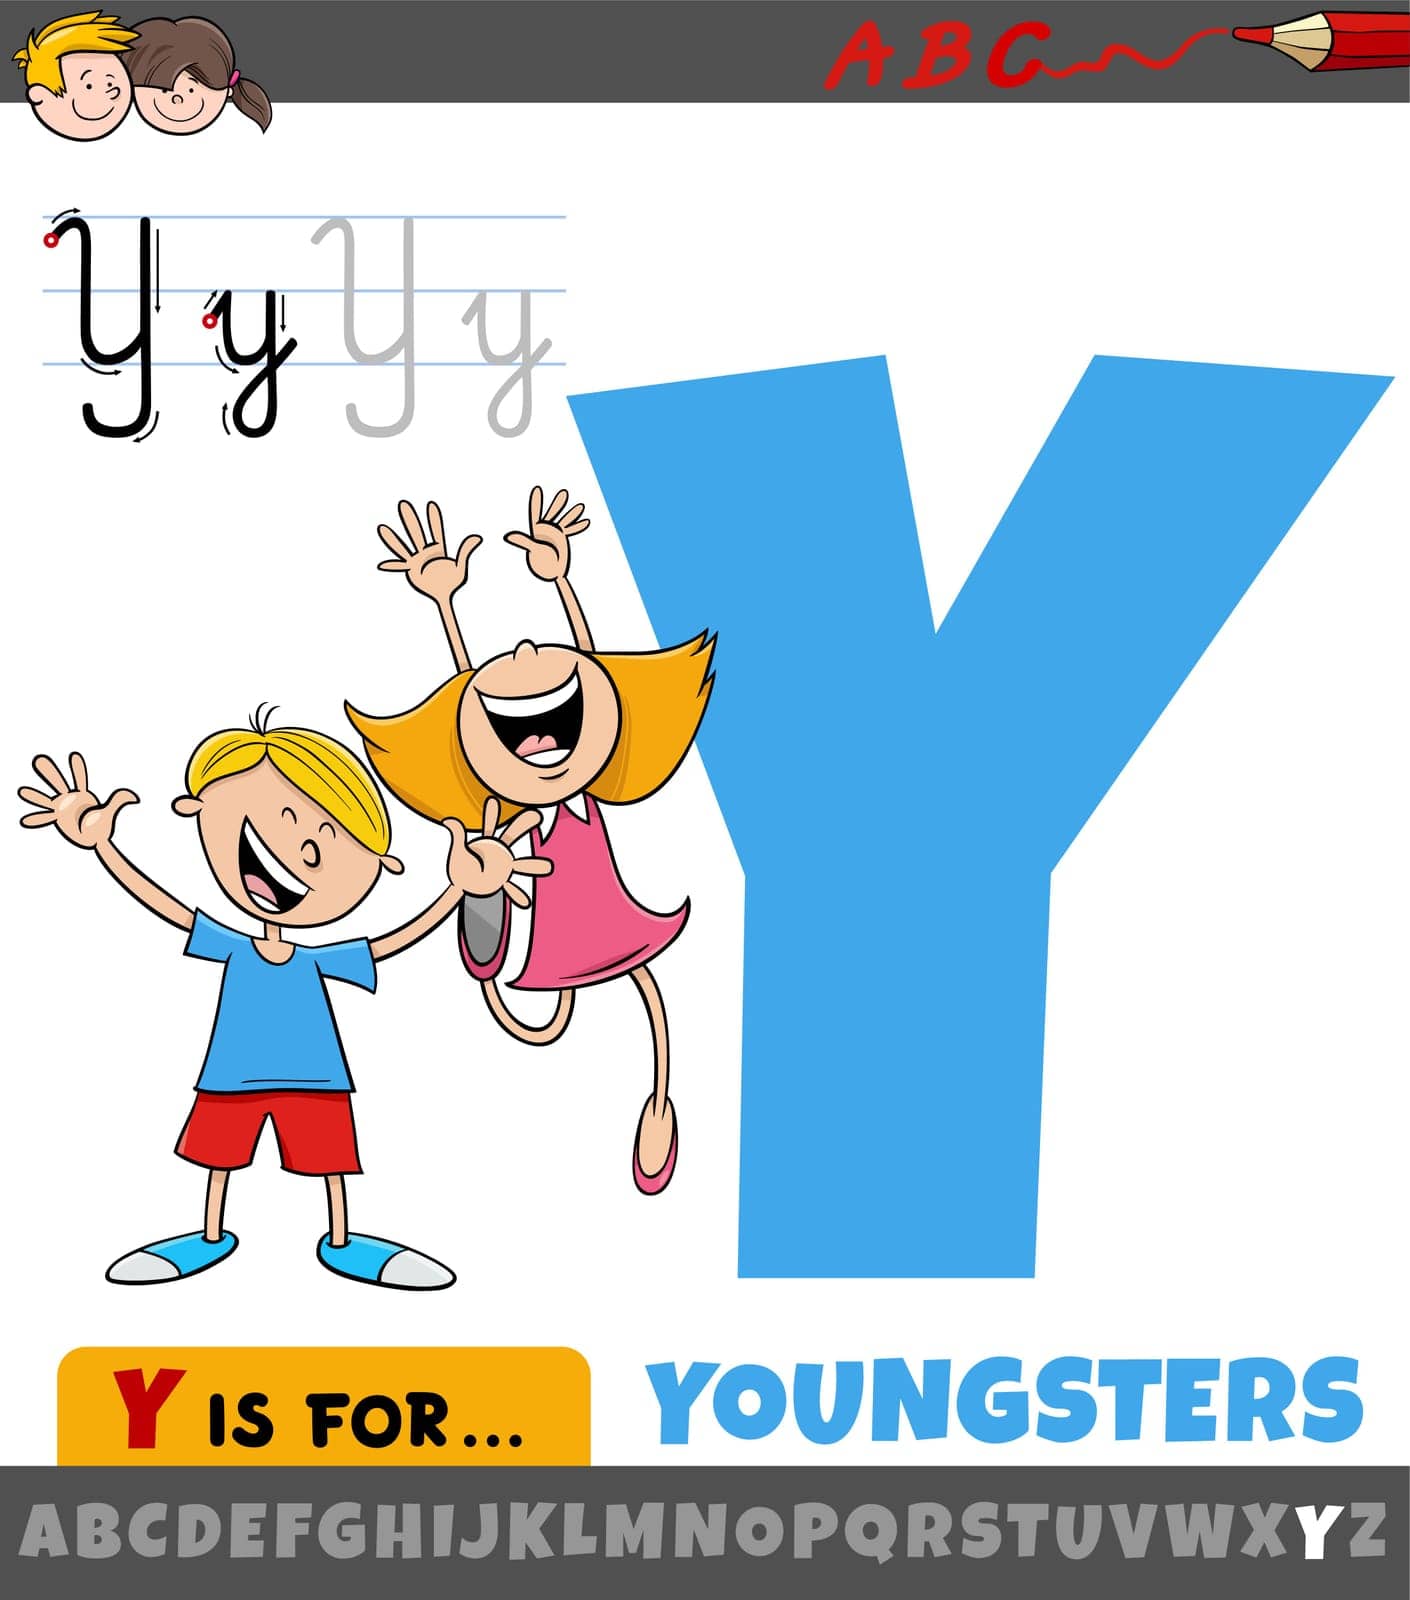 Educational cartoon illustration of letter Y from alphabet with youngsters characters